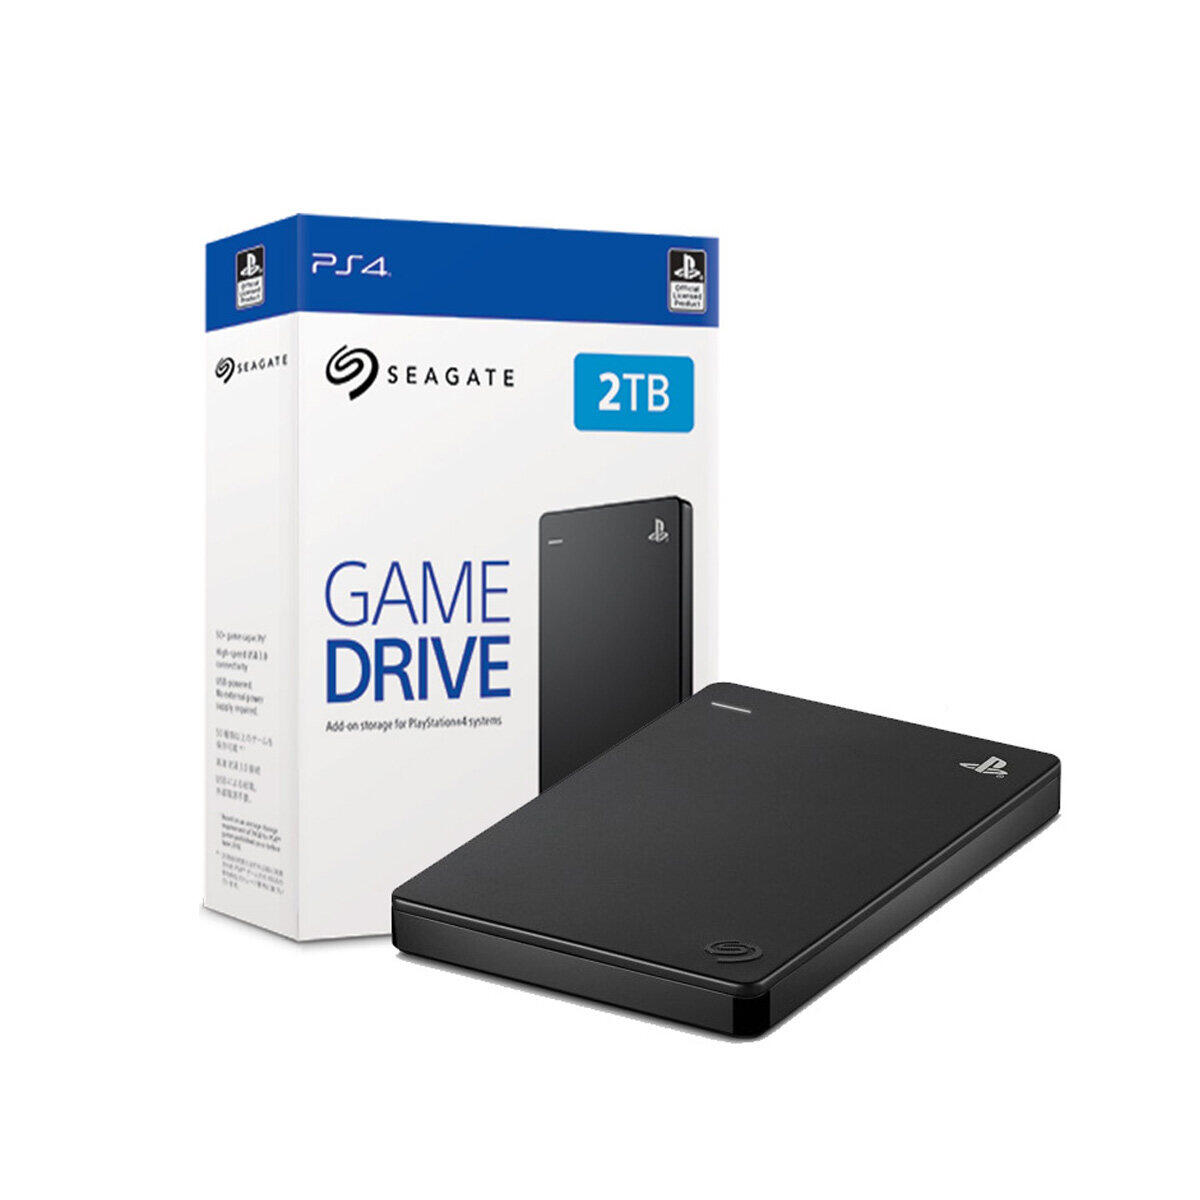 Ps4 4tb SSD. Seagate ps4 4tb cheap sell - off 79. Seagate PLAYSTATION (stgd2000300. Seagate game Drive for ps4 4tb. Seagate game drive